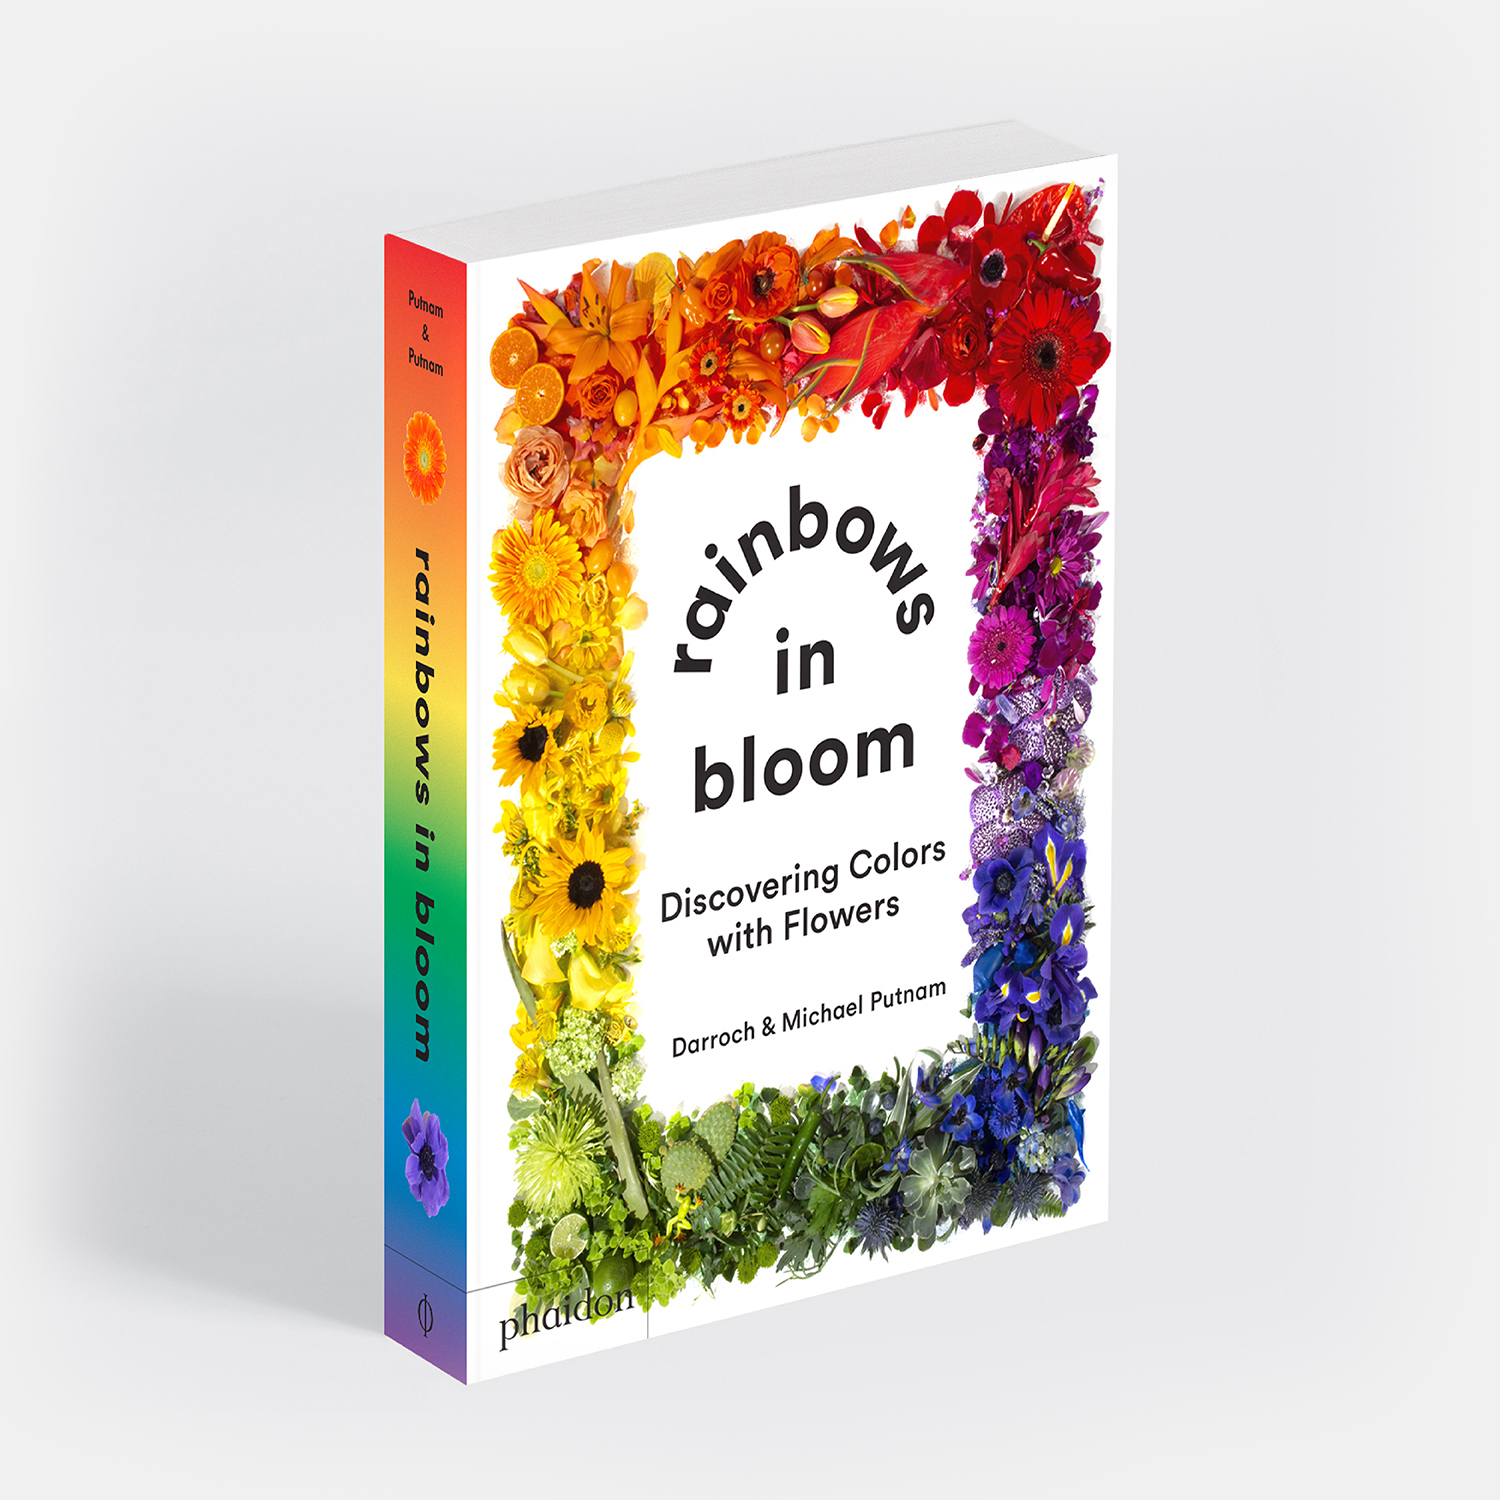 All you need to know about Rainbows in Bloom